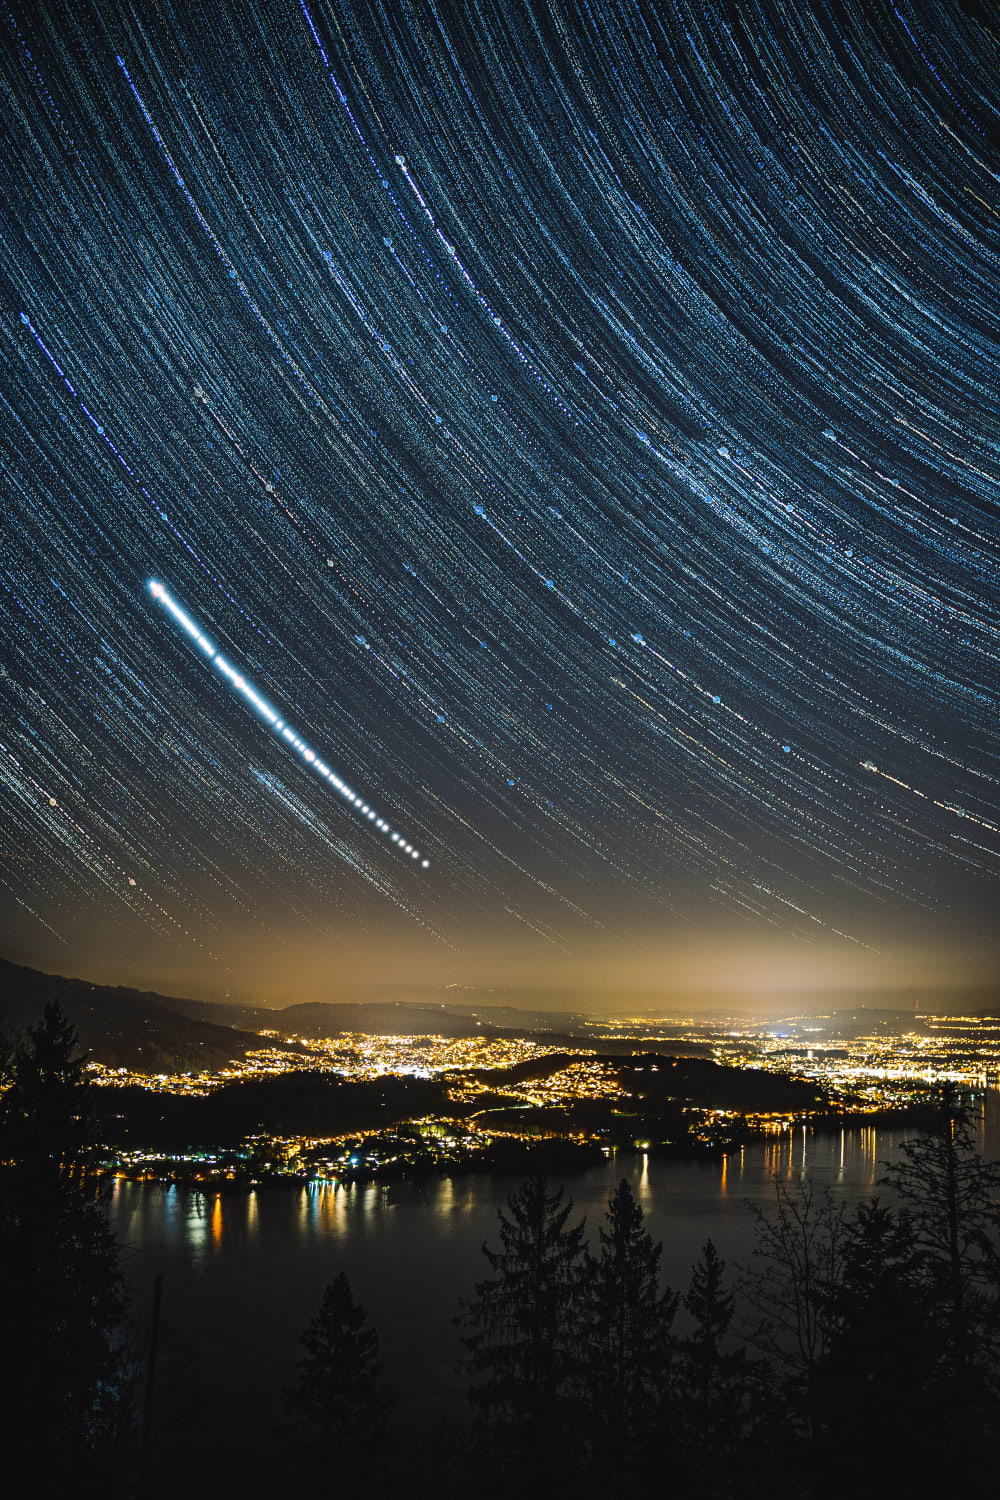 Astrostreak over Luzern, Switzerland. 120 photos compiled into After Effects for a timelapse